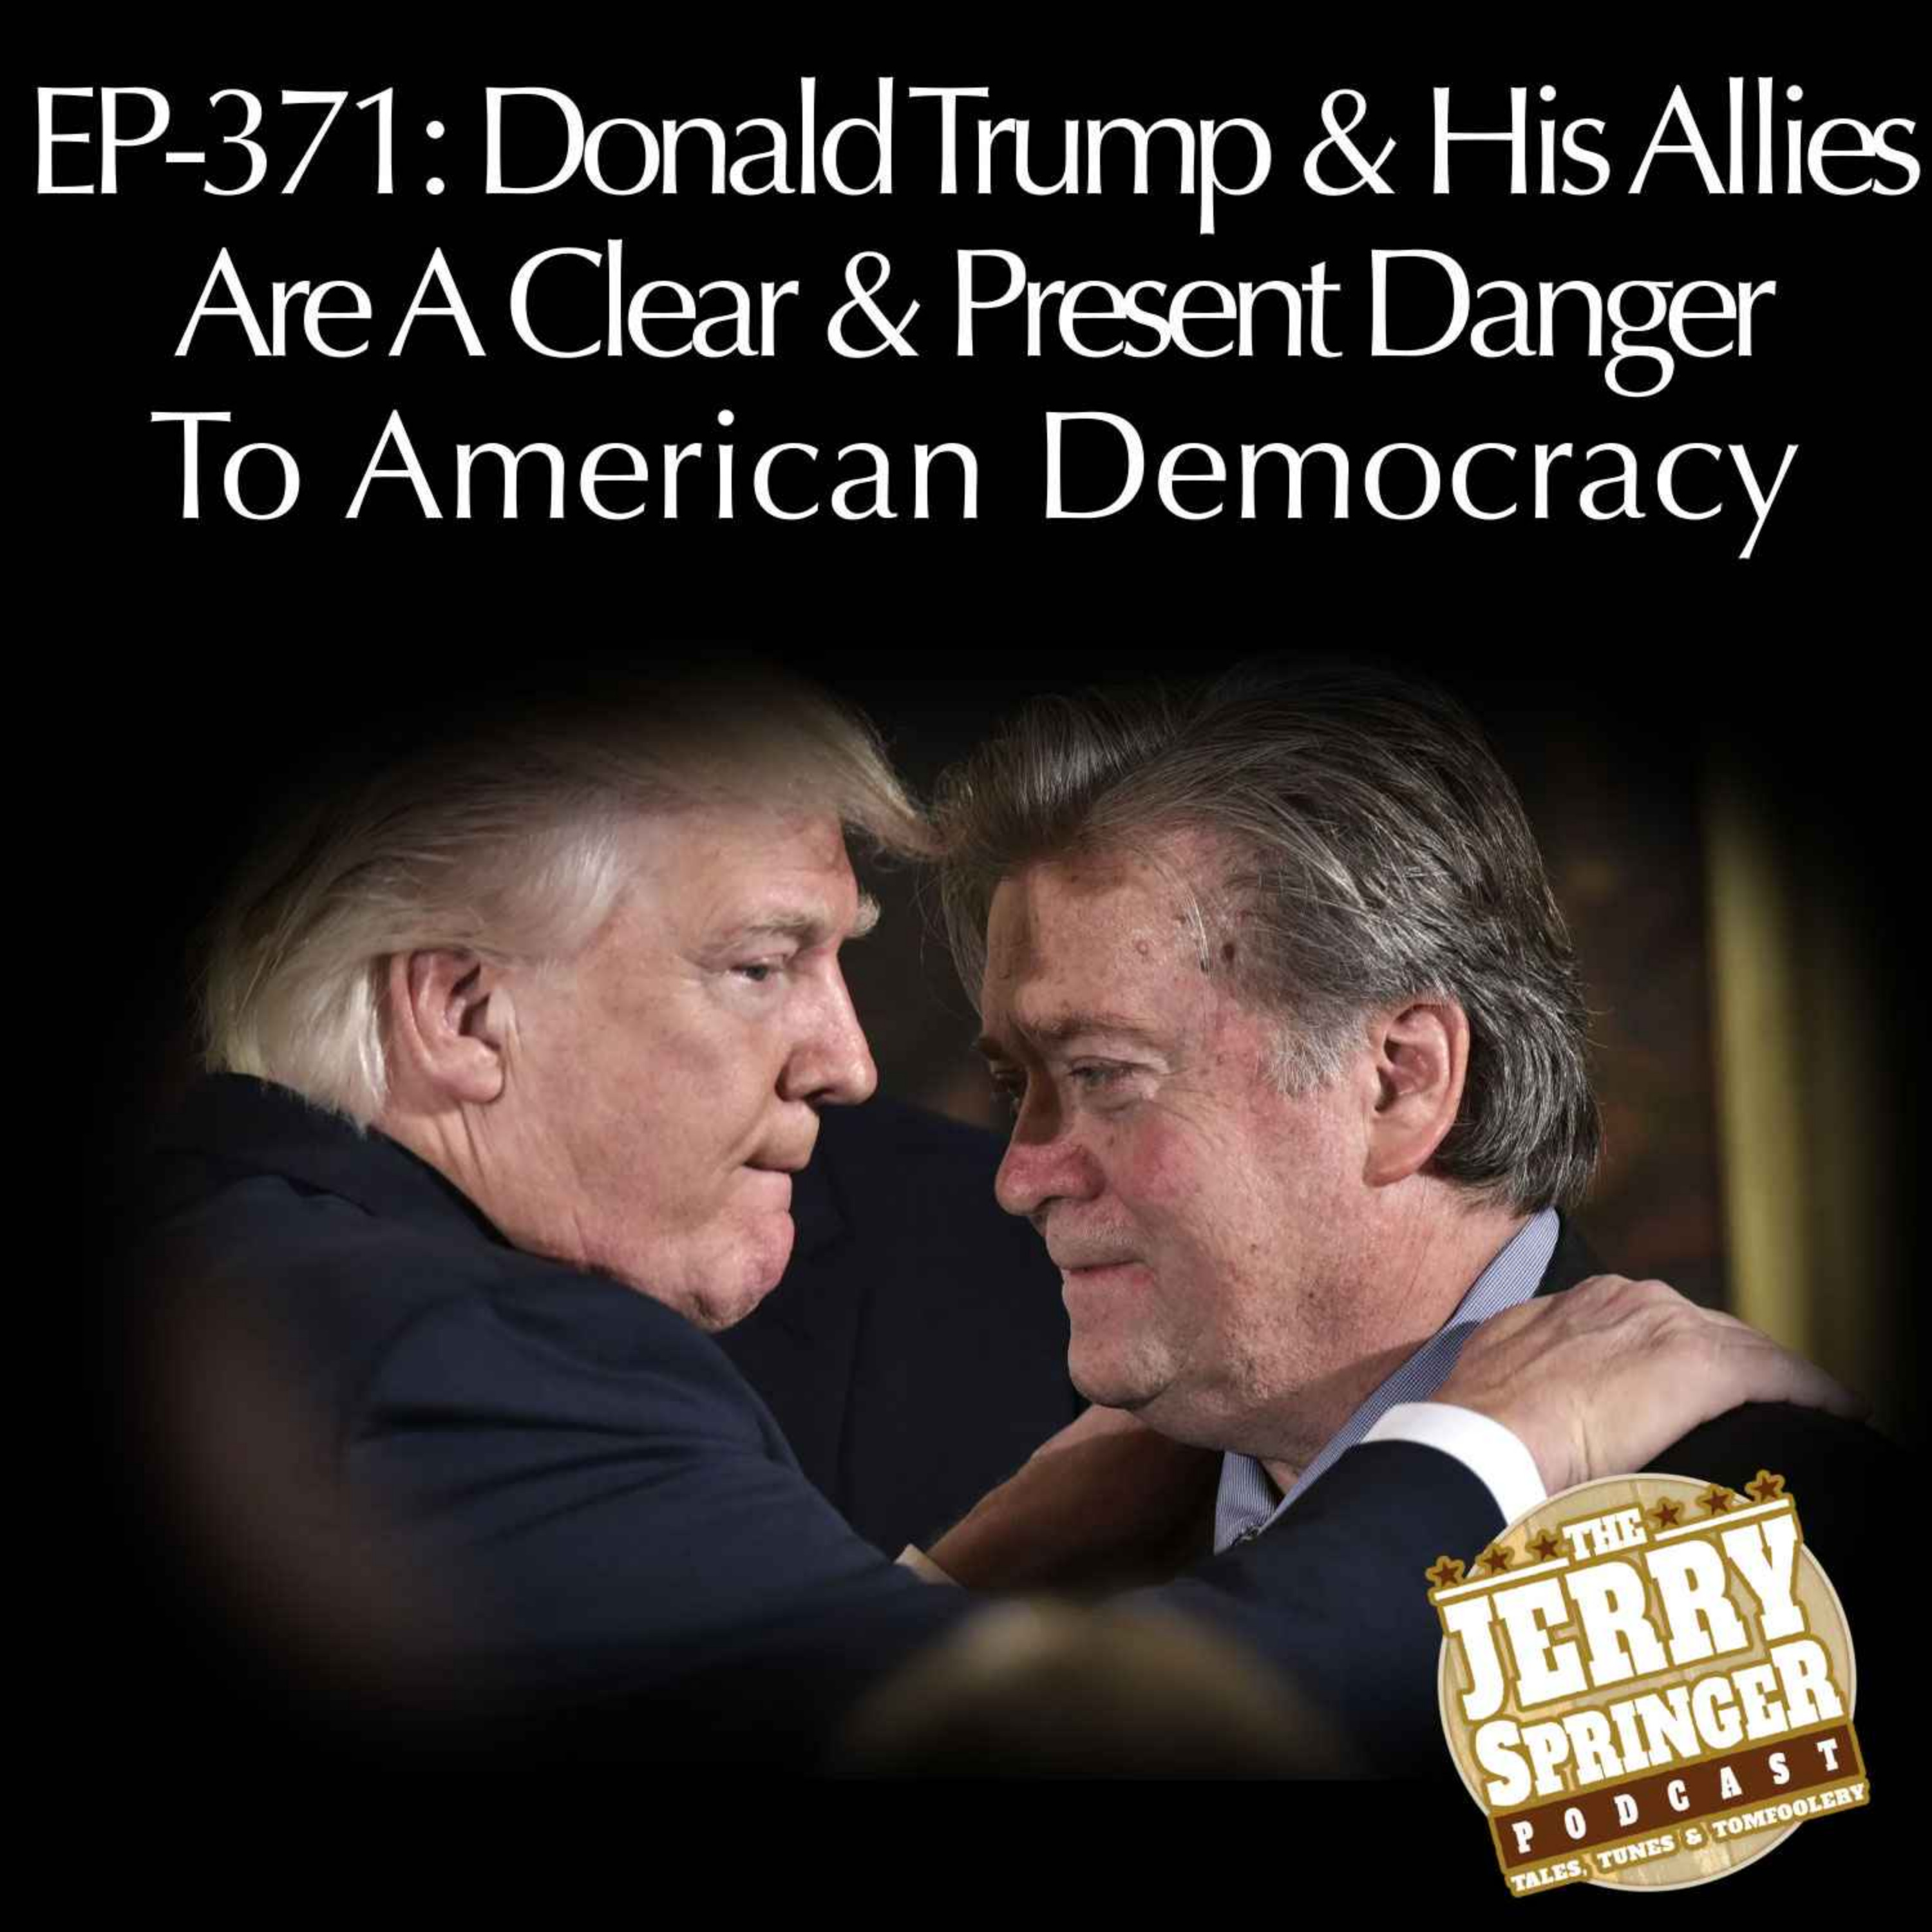 Donald Trump & His Allies Are A Clear & Present Danger To American Democracy: EP - 371